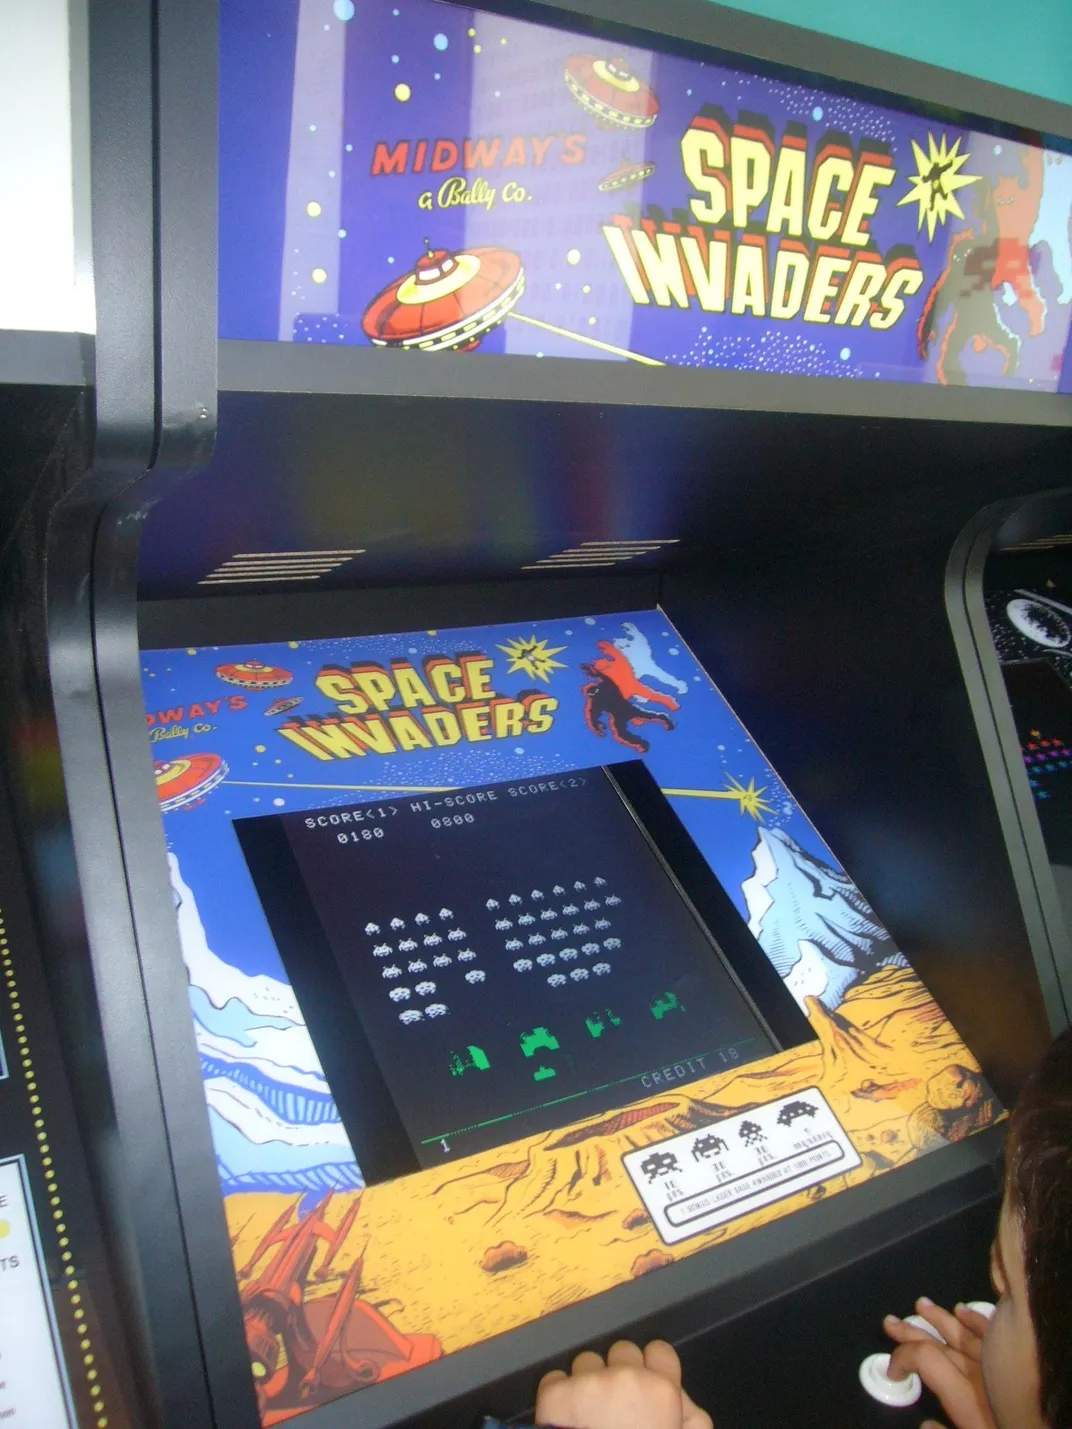 The iconic shooting game in its original stand-up arcade form.